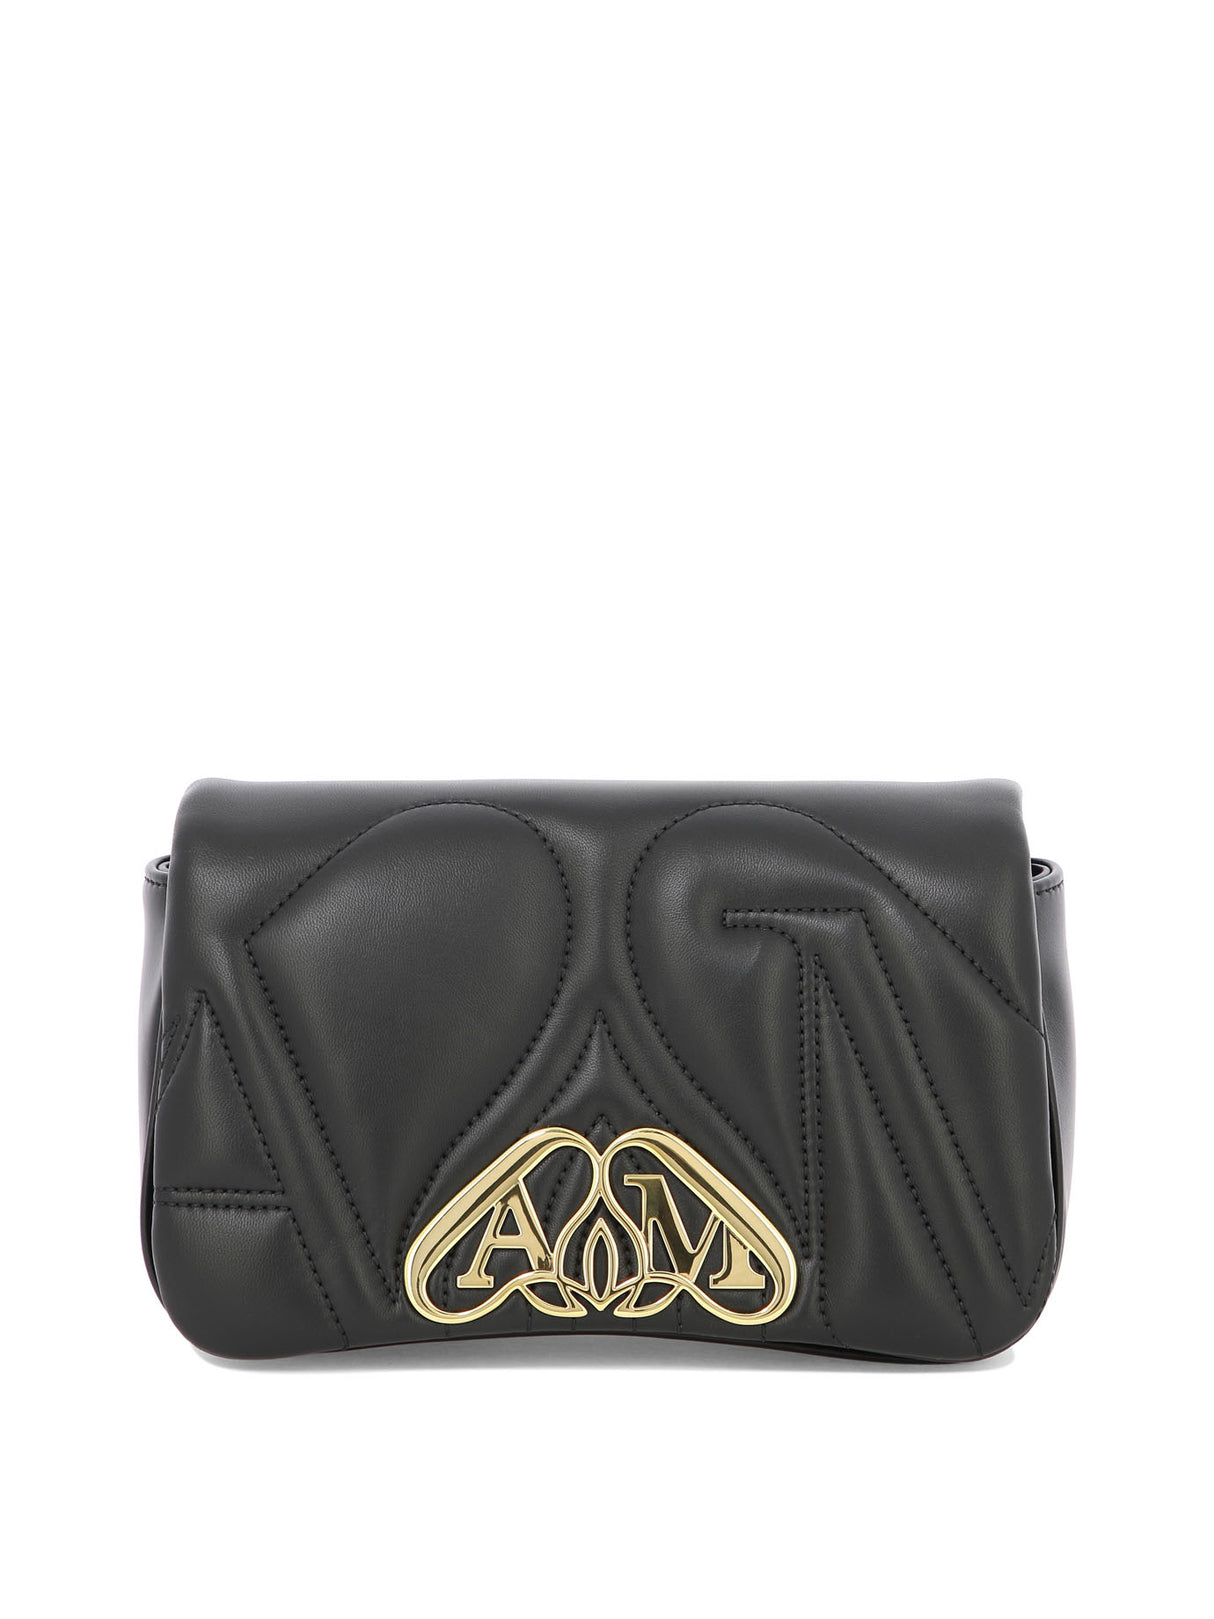 ALEXANDER MCQUEEN "Mini Seal" Black Leather Crossbody Bag with Detachable Gold Chain Strap